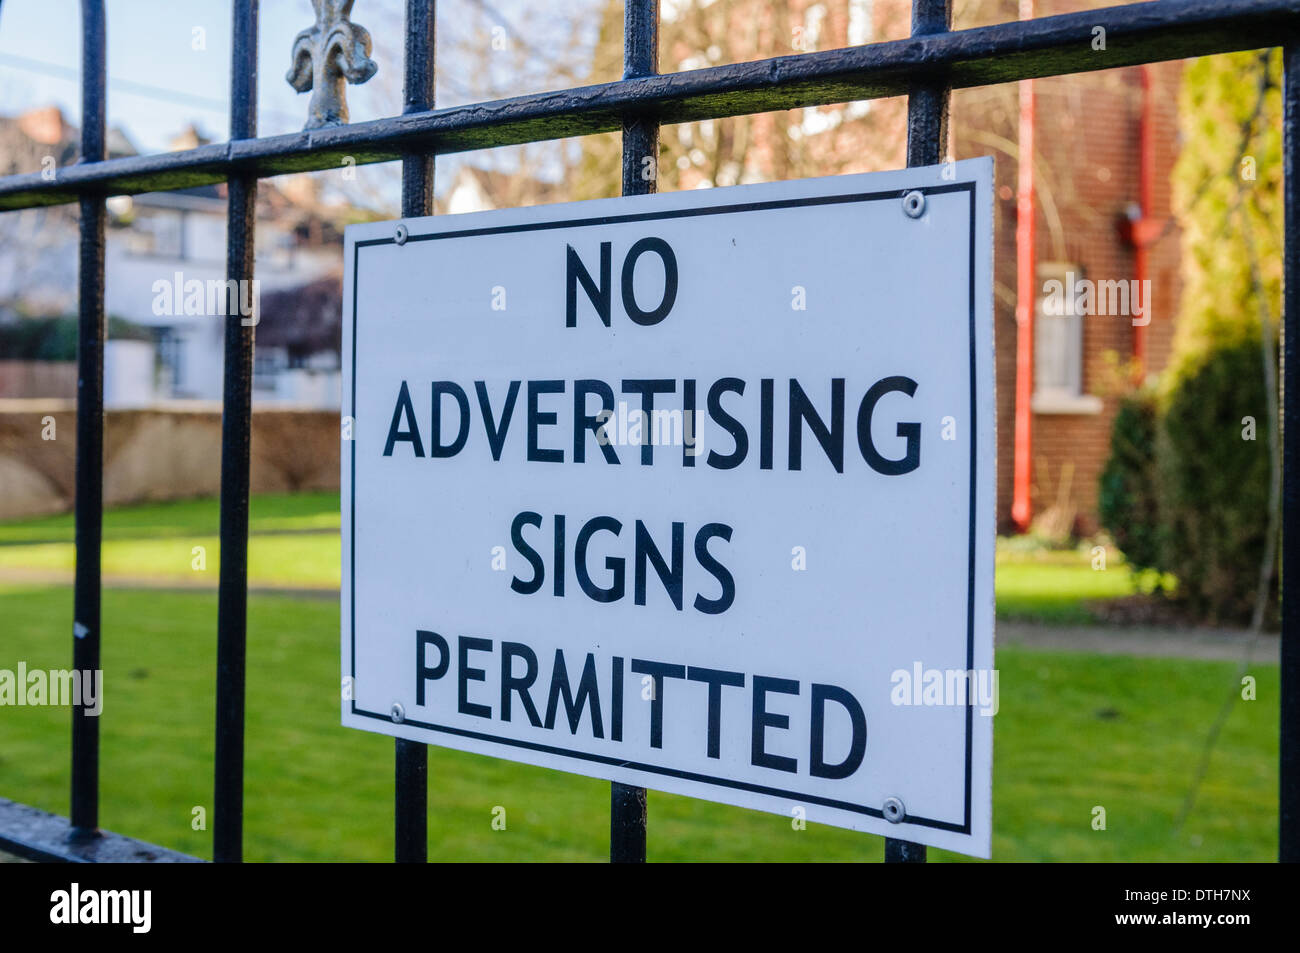 Sign on a fence warning that advertising signs are not permitted Stock Photo